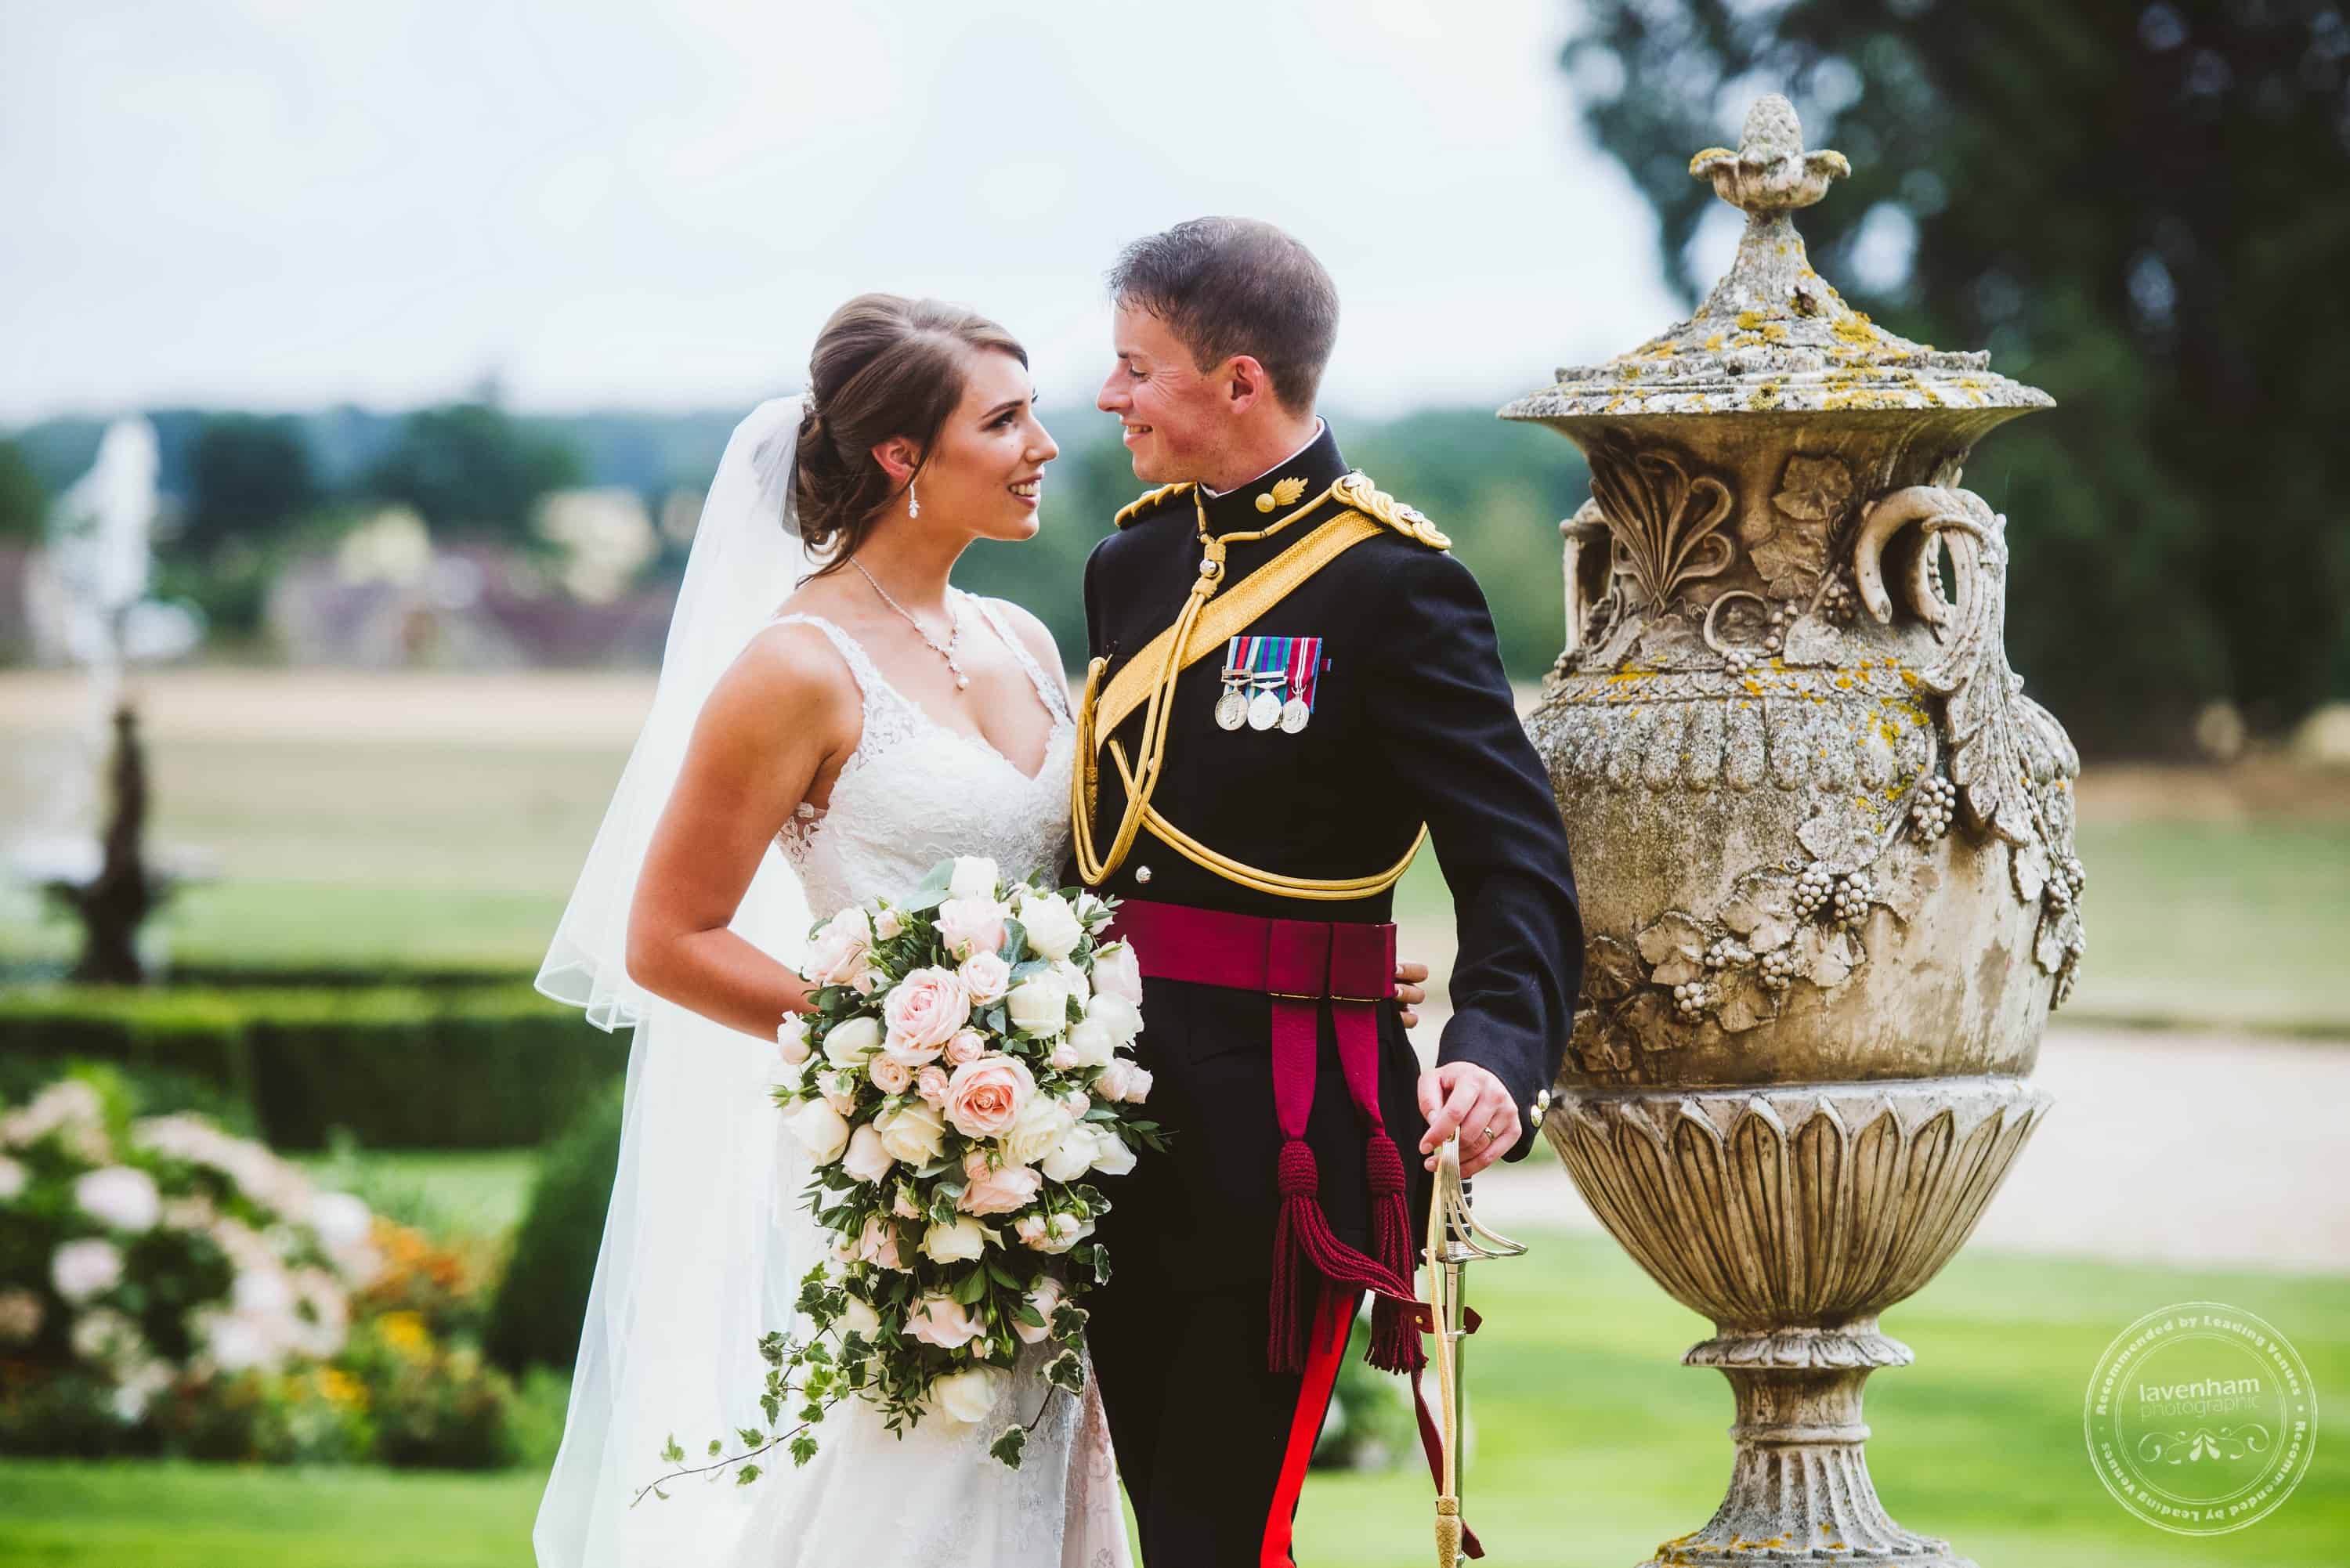 Wedding photography at Gosfield Hall with stone textures on the urn in the grounds and fountain and flowerbeds looking great in the background